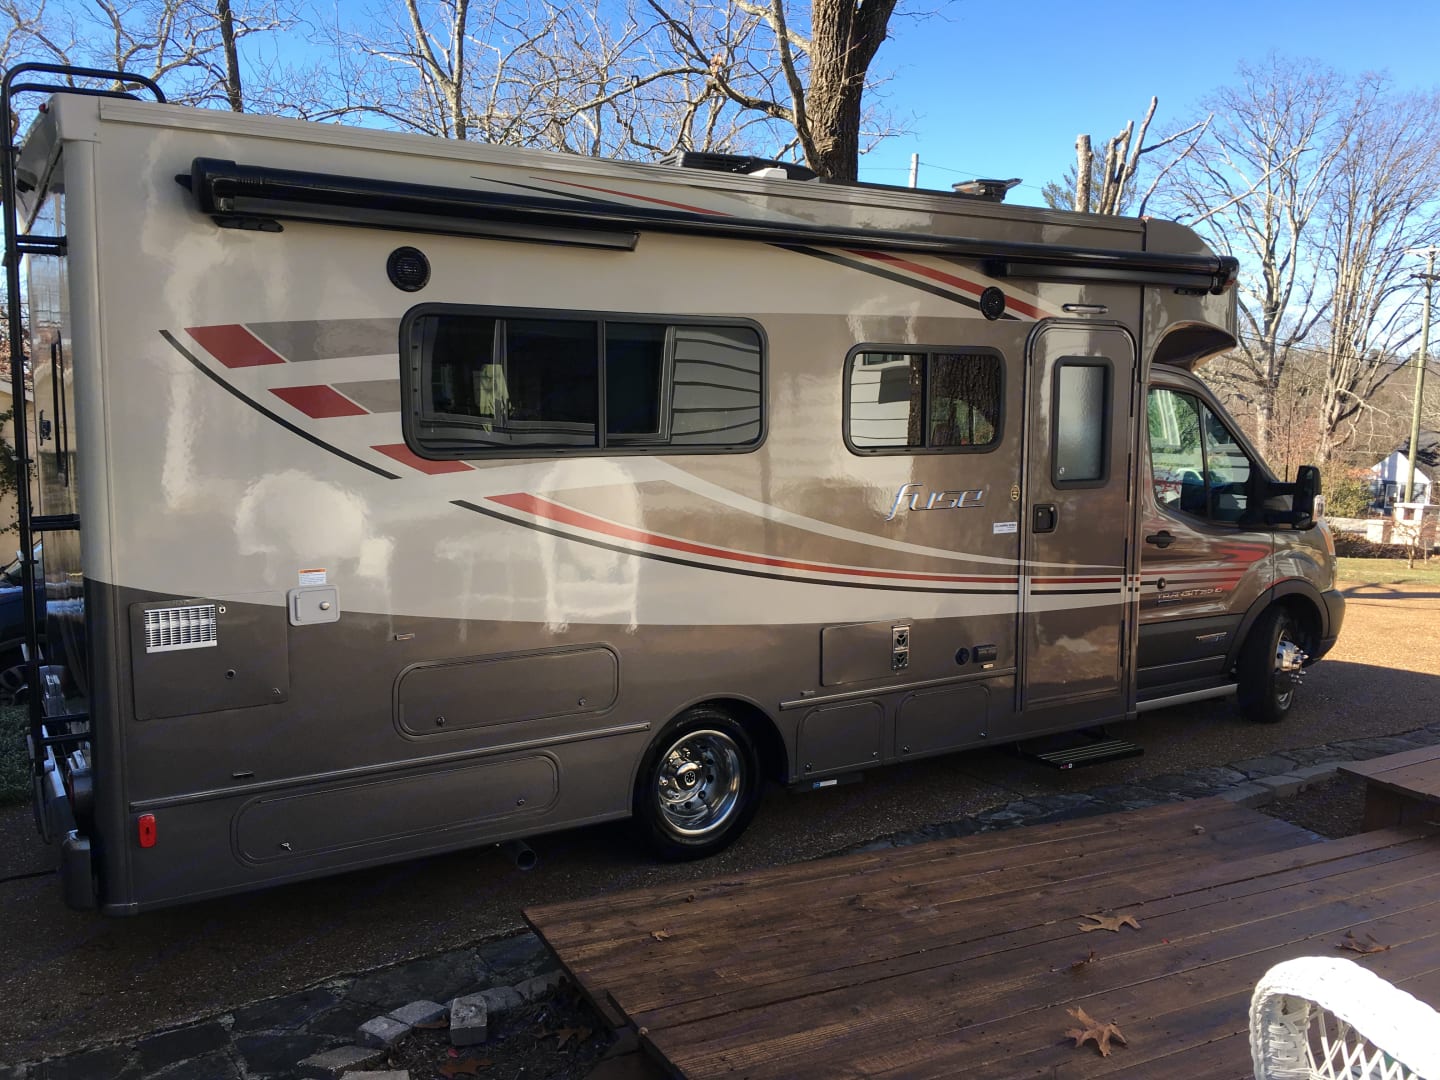 RV for rent near Great Smoky Mountains National Park